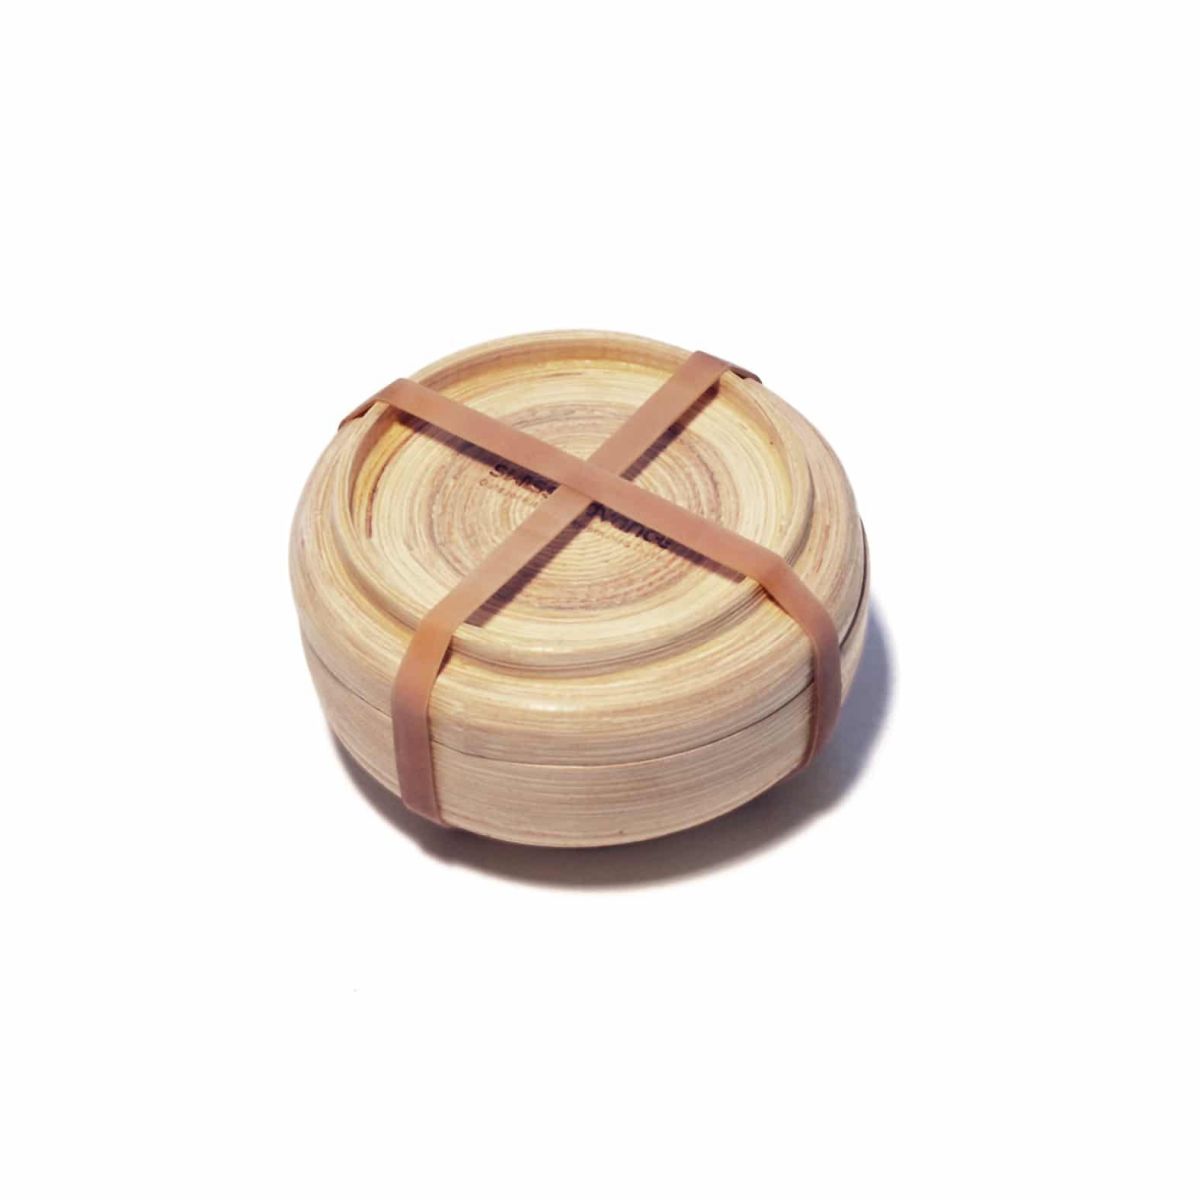 Bamboo Lunch Box - Small